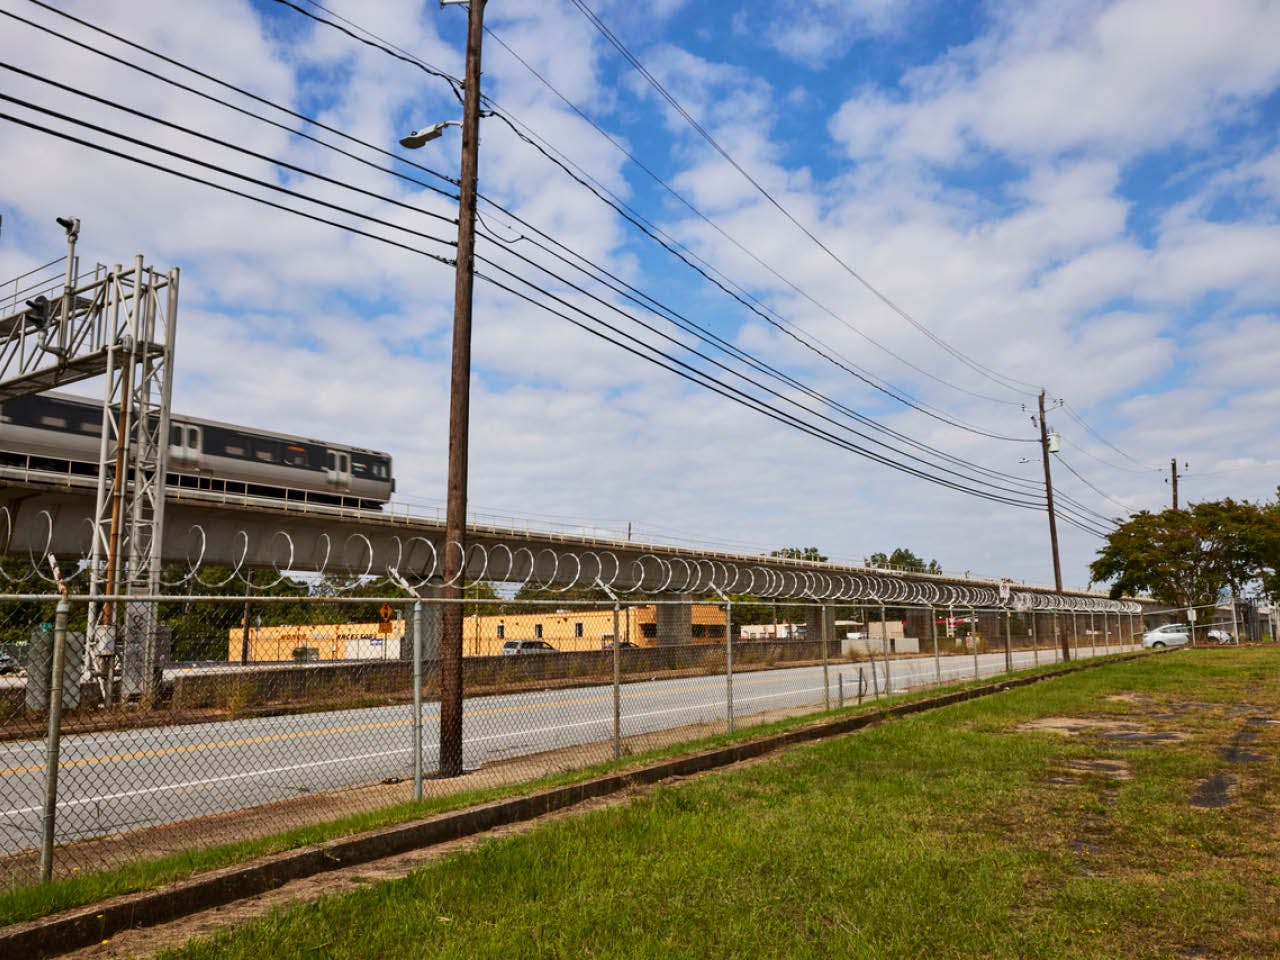 A MARTA train passes by the Beltline's site at 1150 Murphy Avenue and Avon Avenue. (Photo Credit: Erin Sintos)